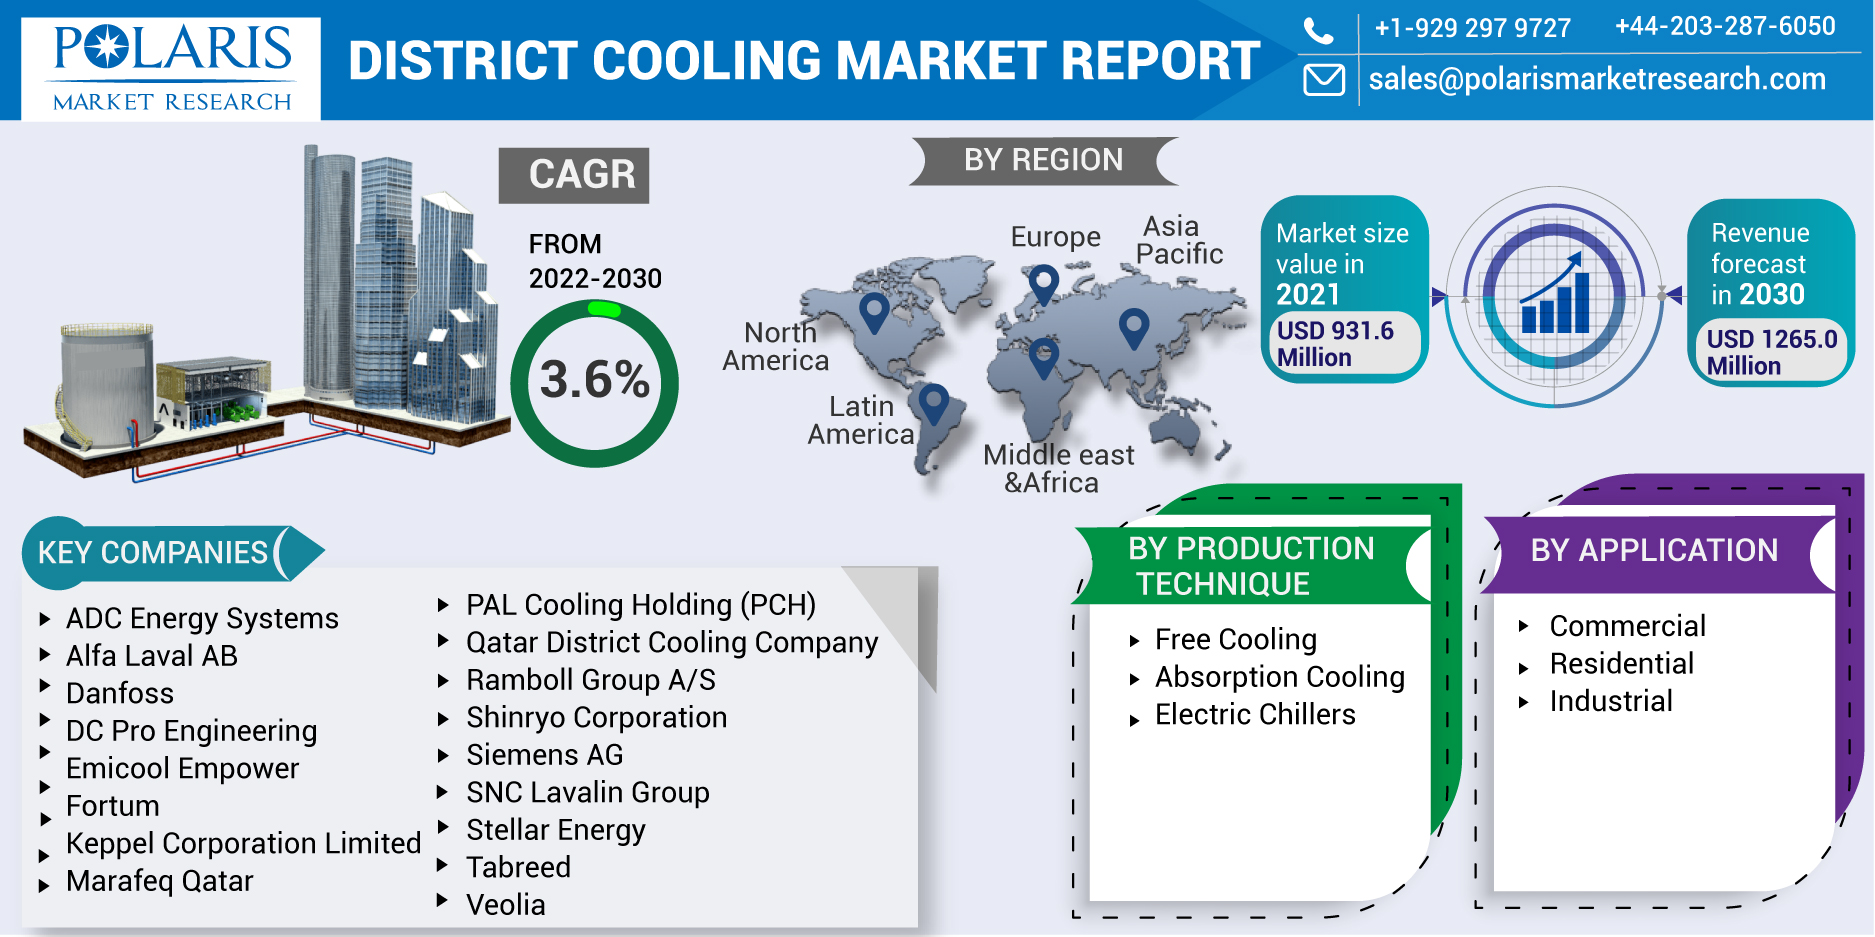 DISTRICT_COOLING_MARKET_REPORT-0120